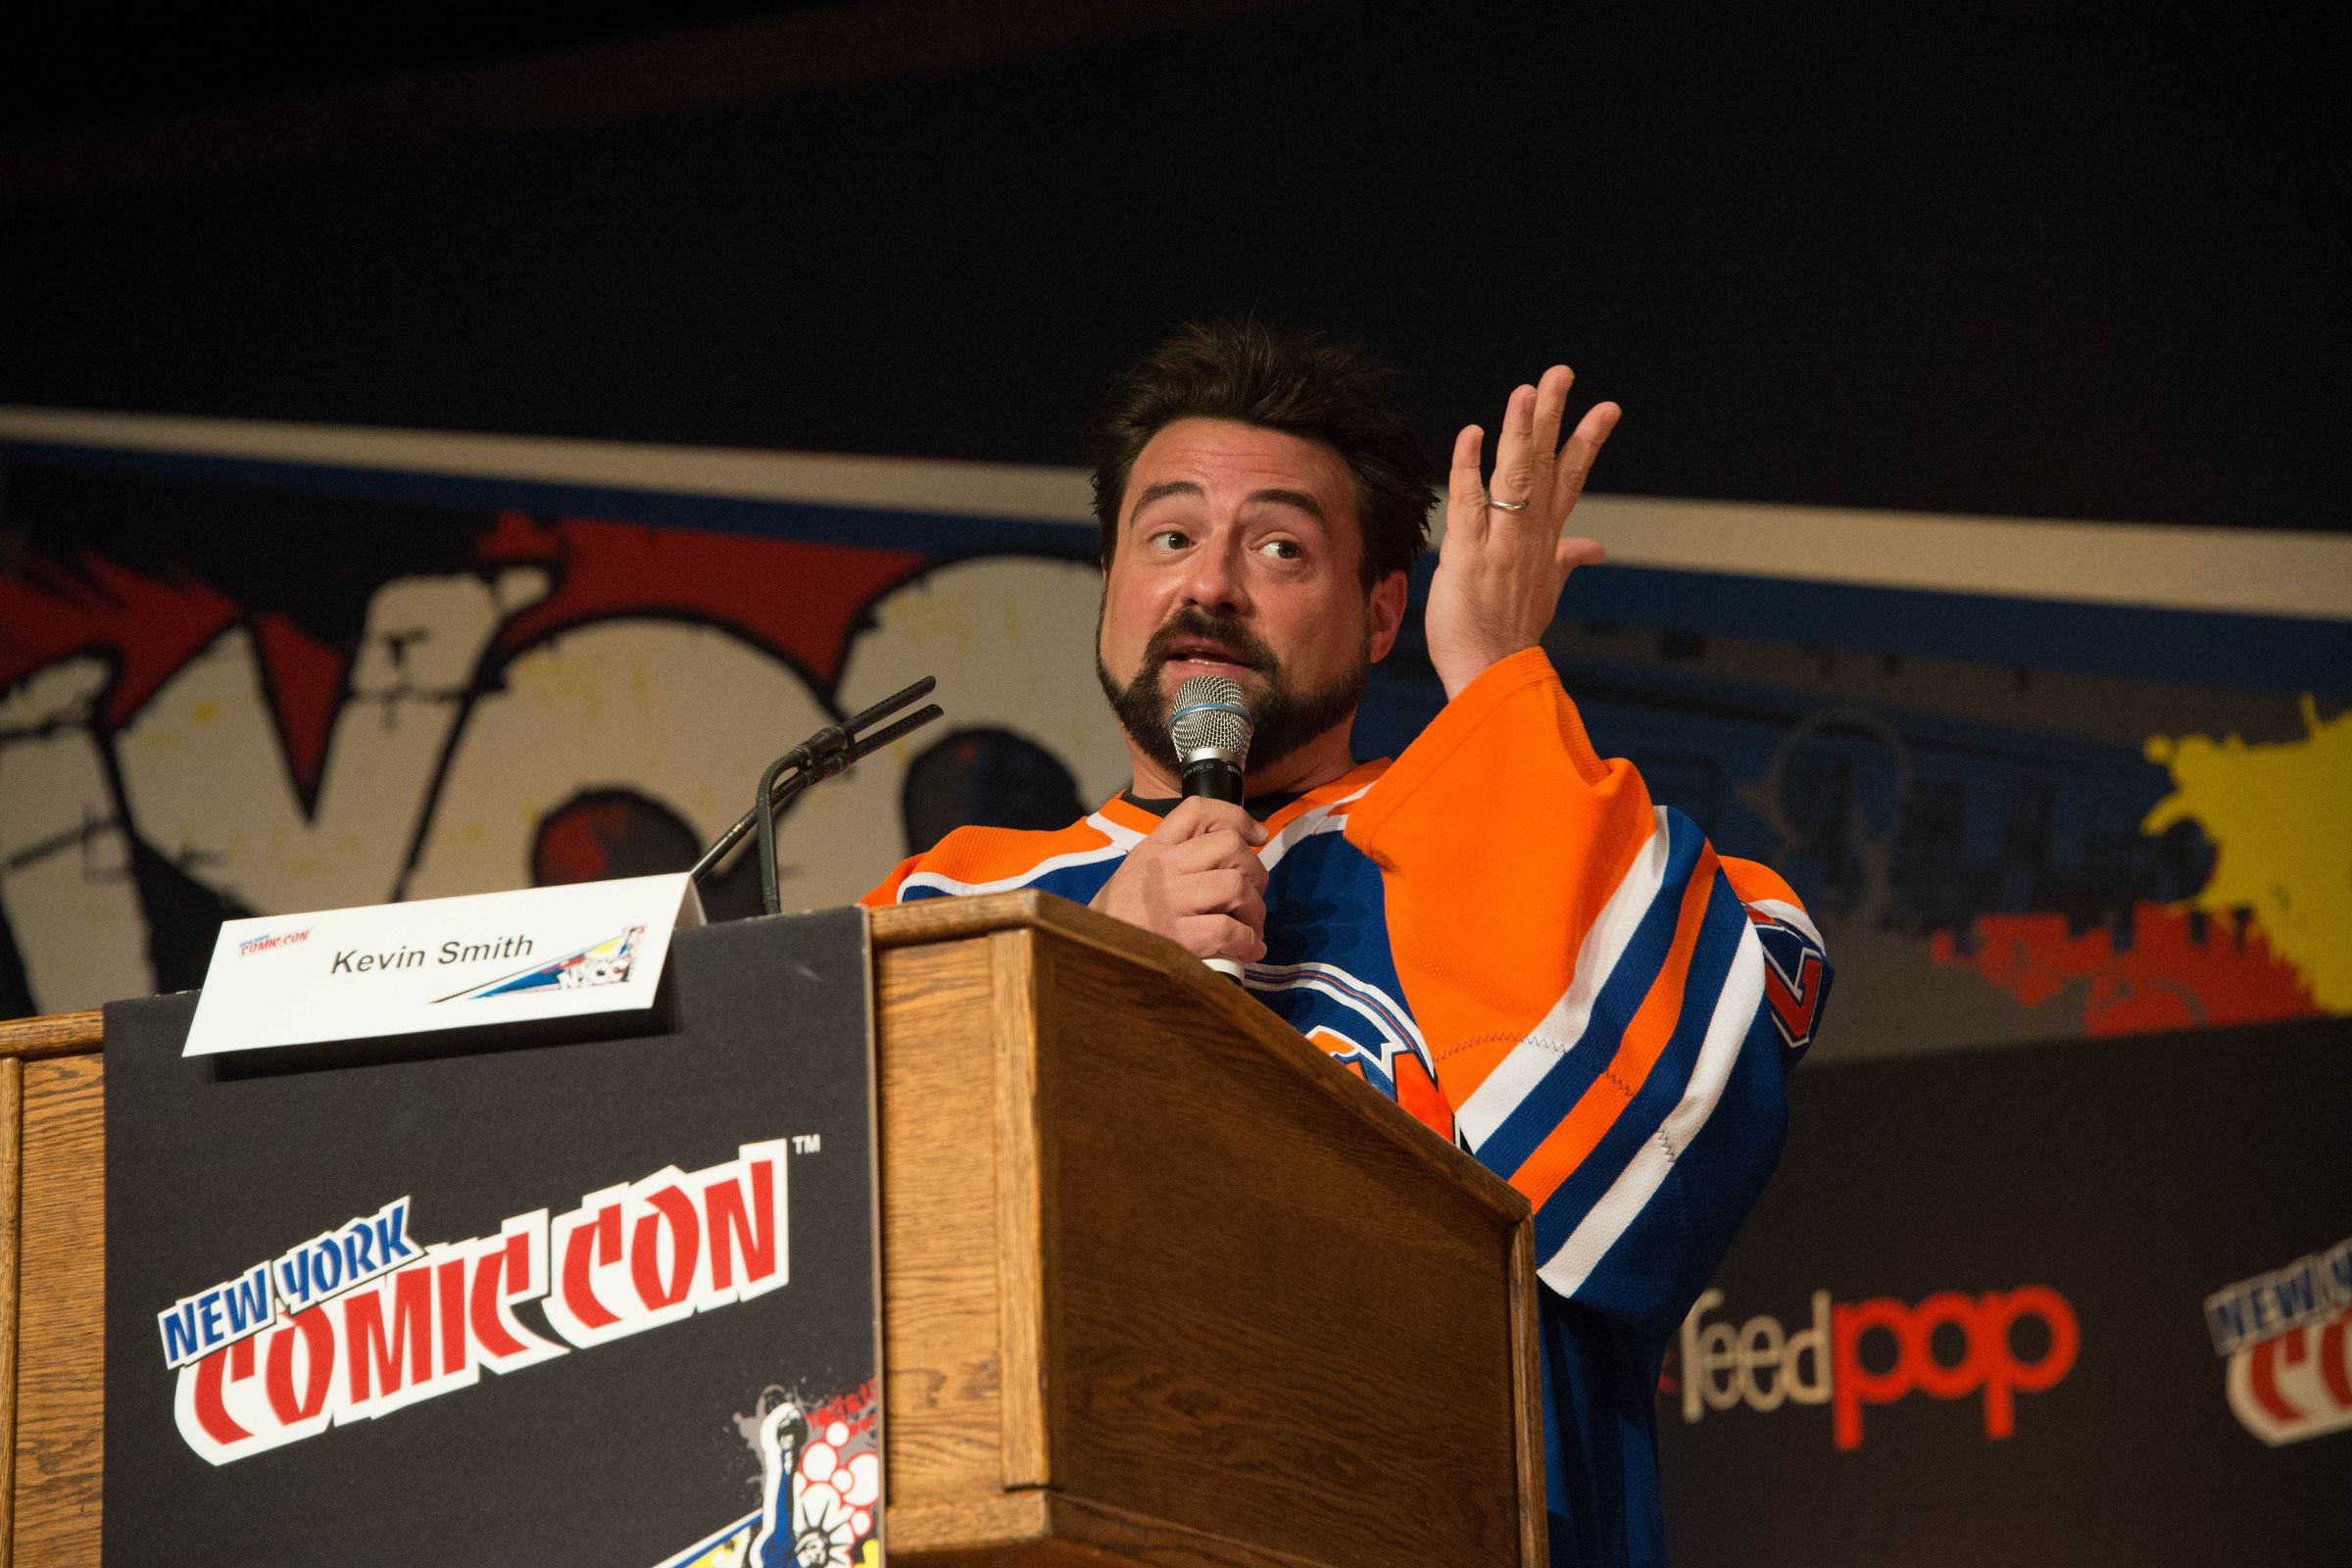 Kevin Smith at this year's New York Comic Con